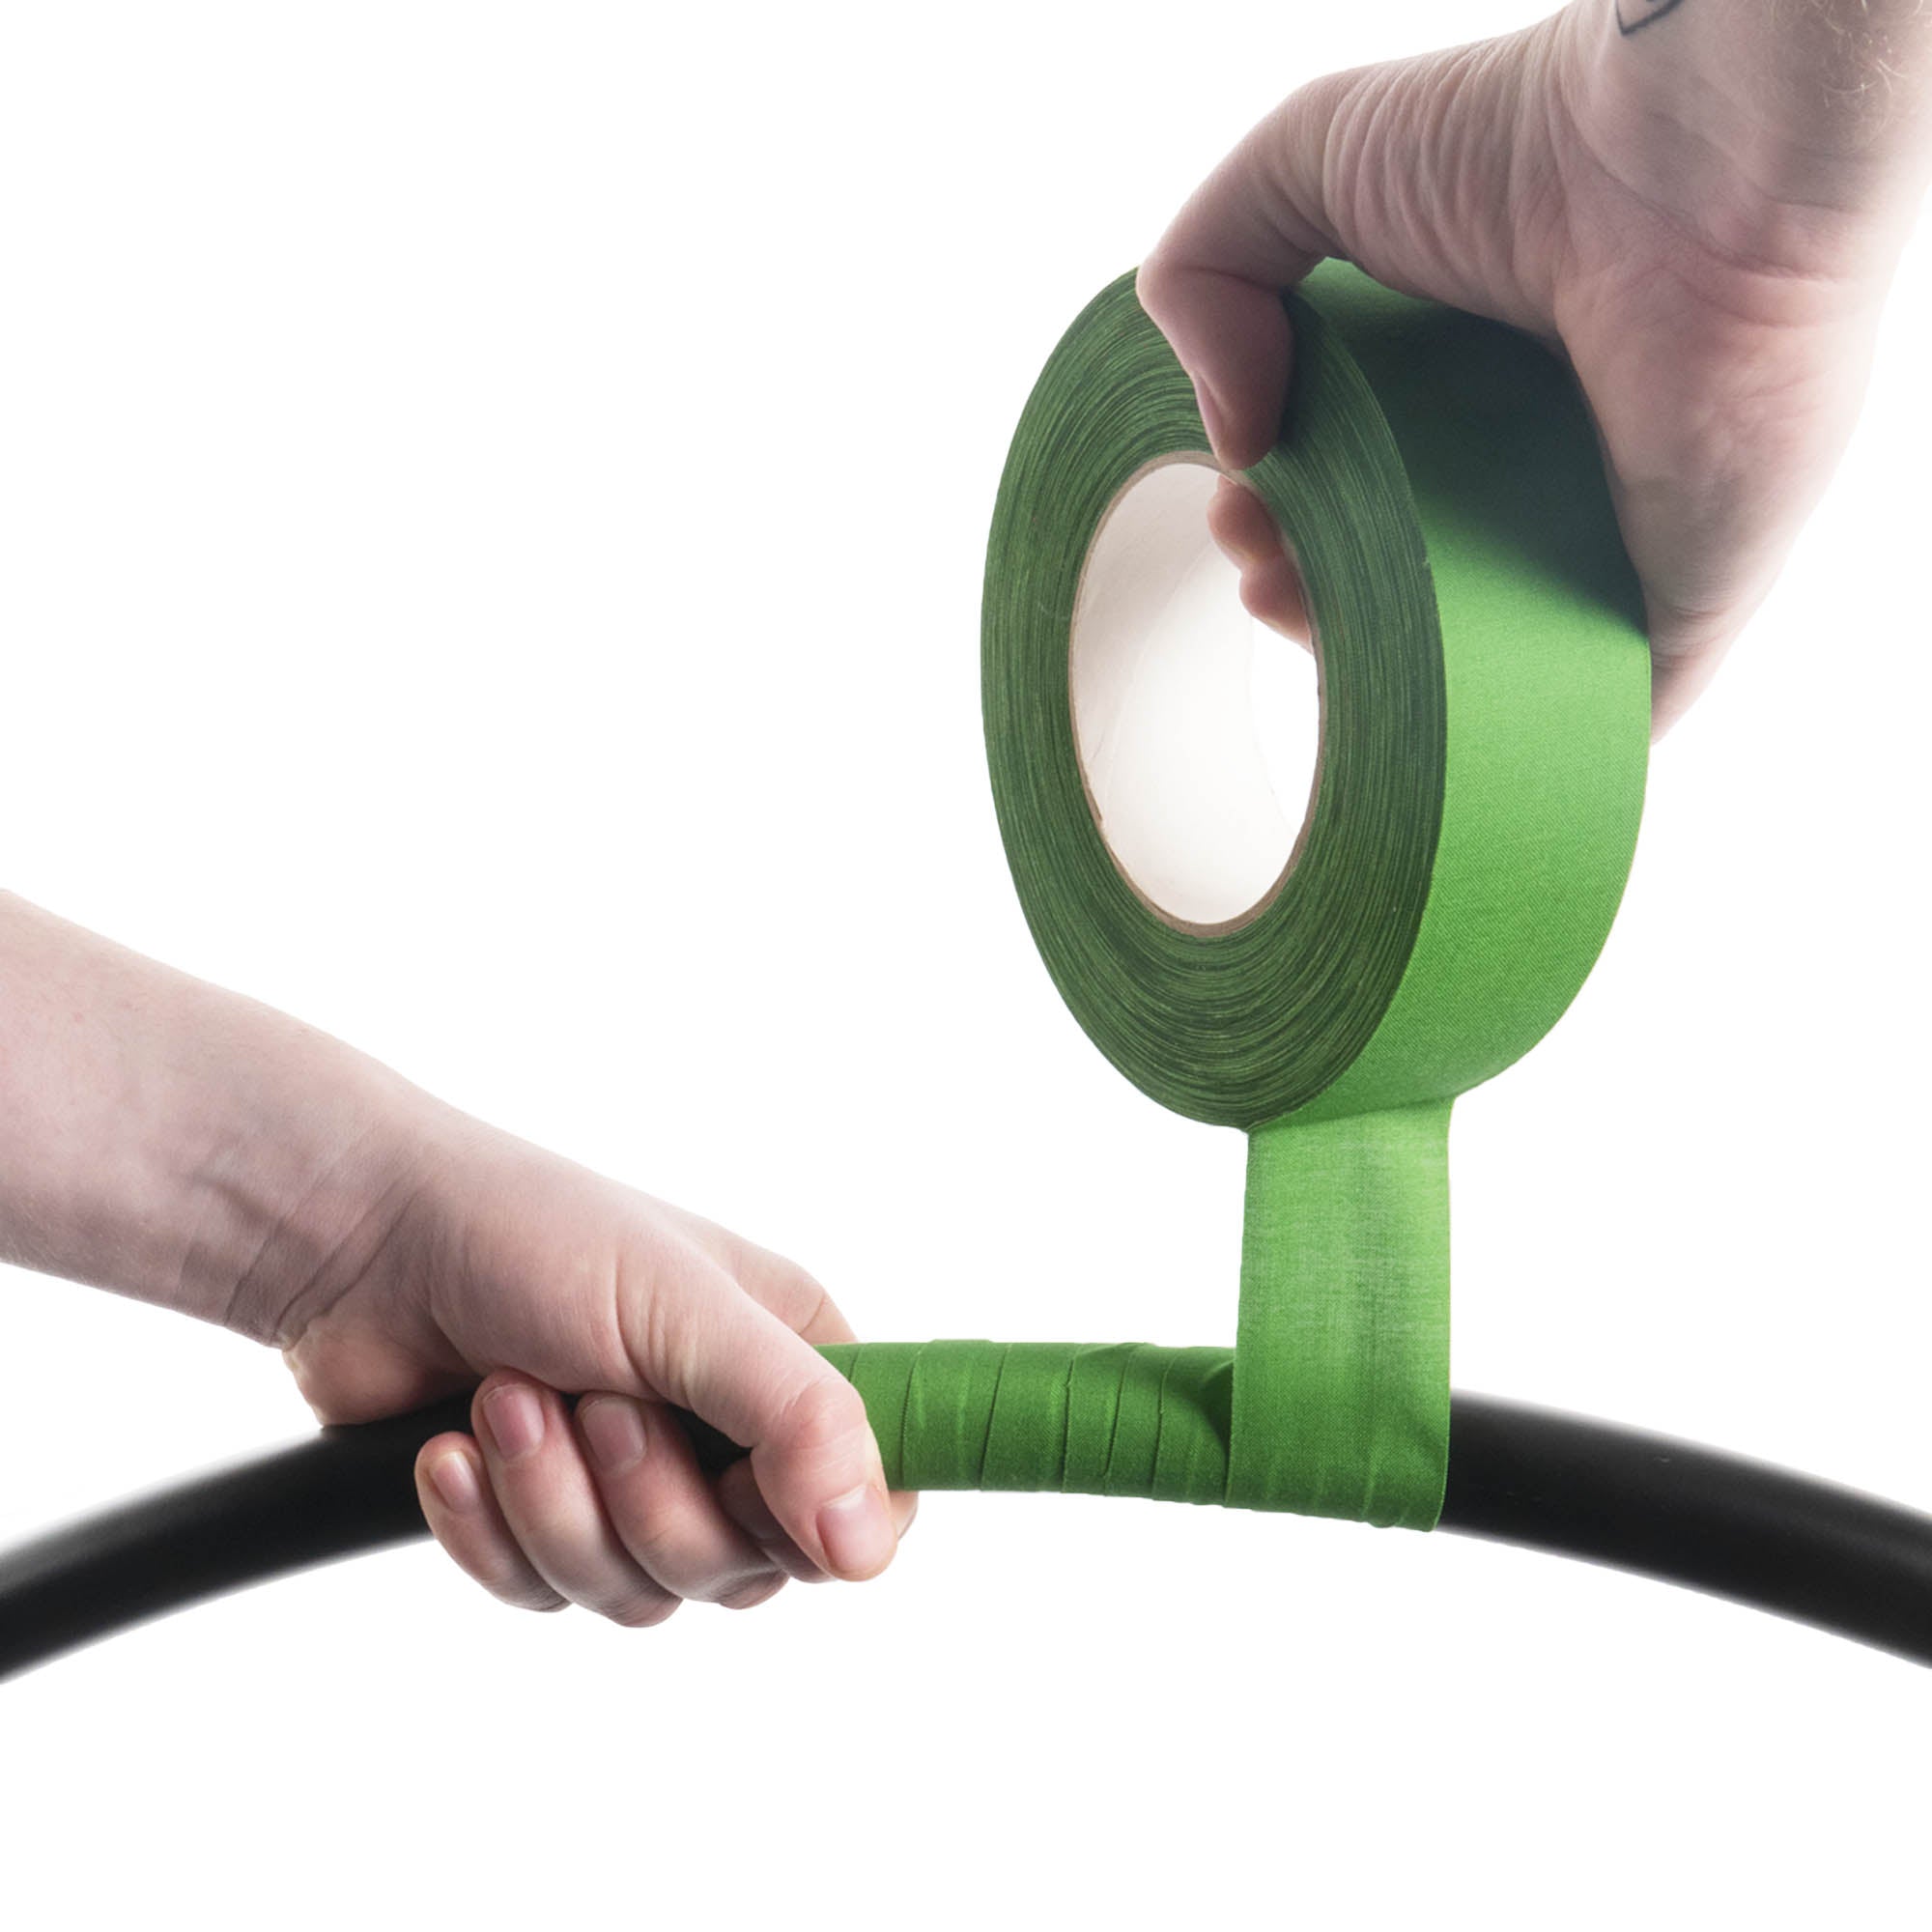 taping a hoop with green 3.8cm